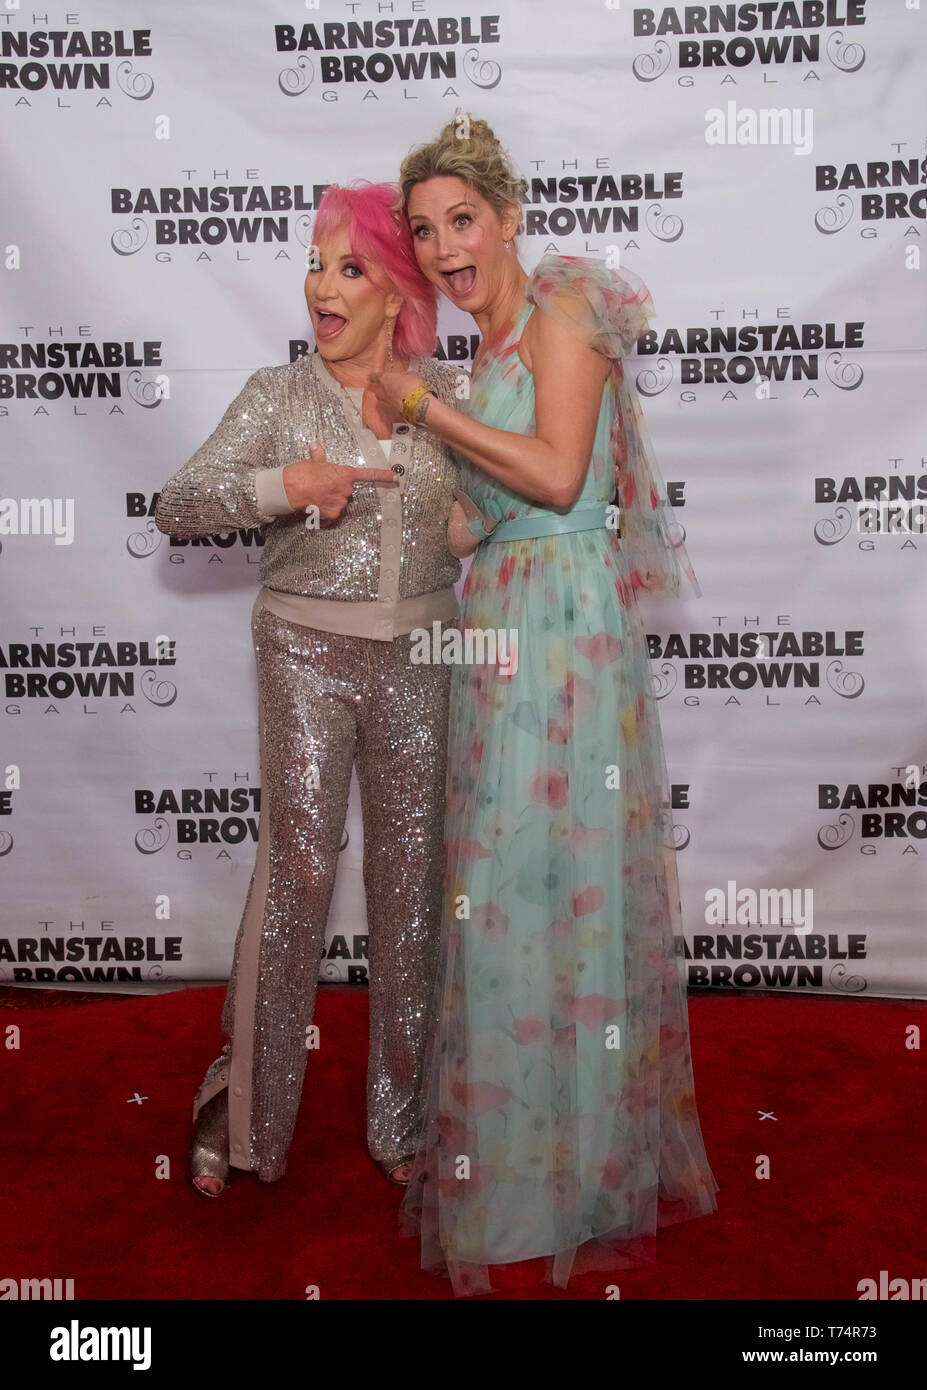 Louisville, Kentucky, USA. 03rd May, 2019. Tanya Tucker and Jennifer Nettles attends the 2019 Barnstable Brown Kentucky Derby Eve Gala on May 3, 2019 in Louisville, Kentucky. Photo: C Michael Stewart/imageSPACE/MediaPunch Credit: MediaPunch Inc/Alamy Live News Stock Photo